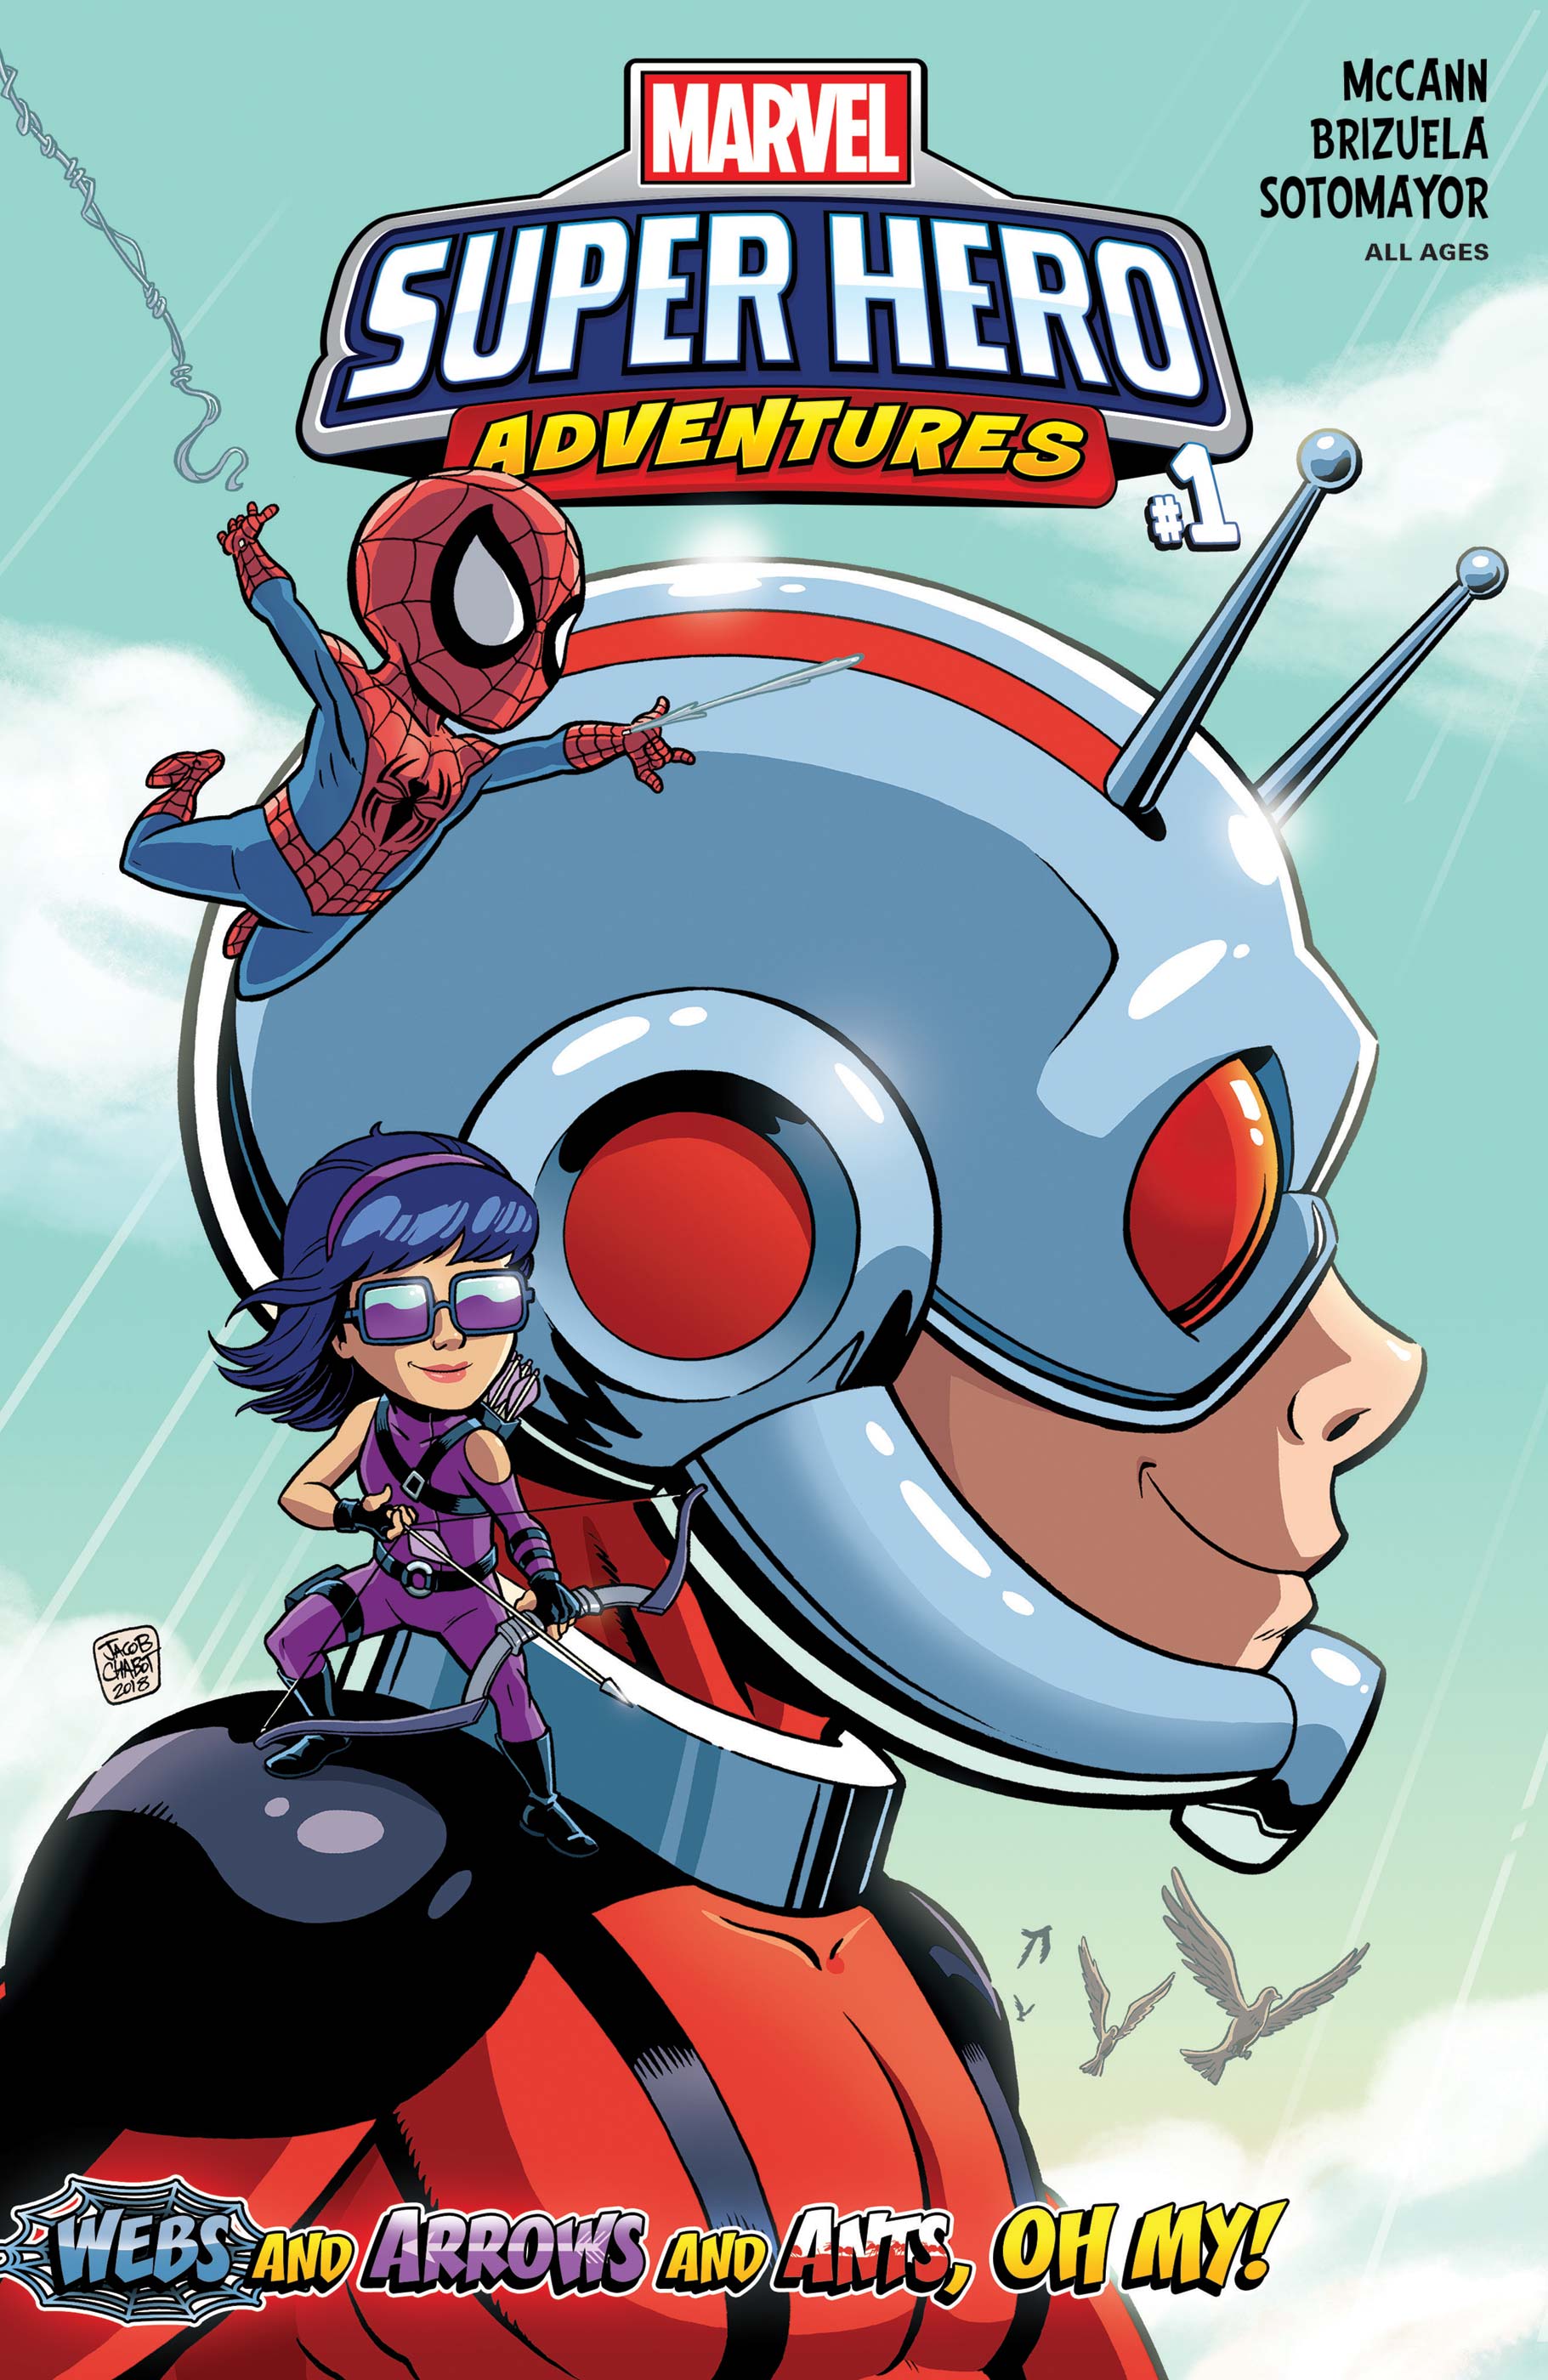 Marvel Super Hero Adventures: Webs and Arrows and Ants, Oh My! (2018) #1